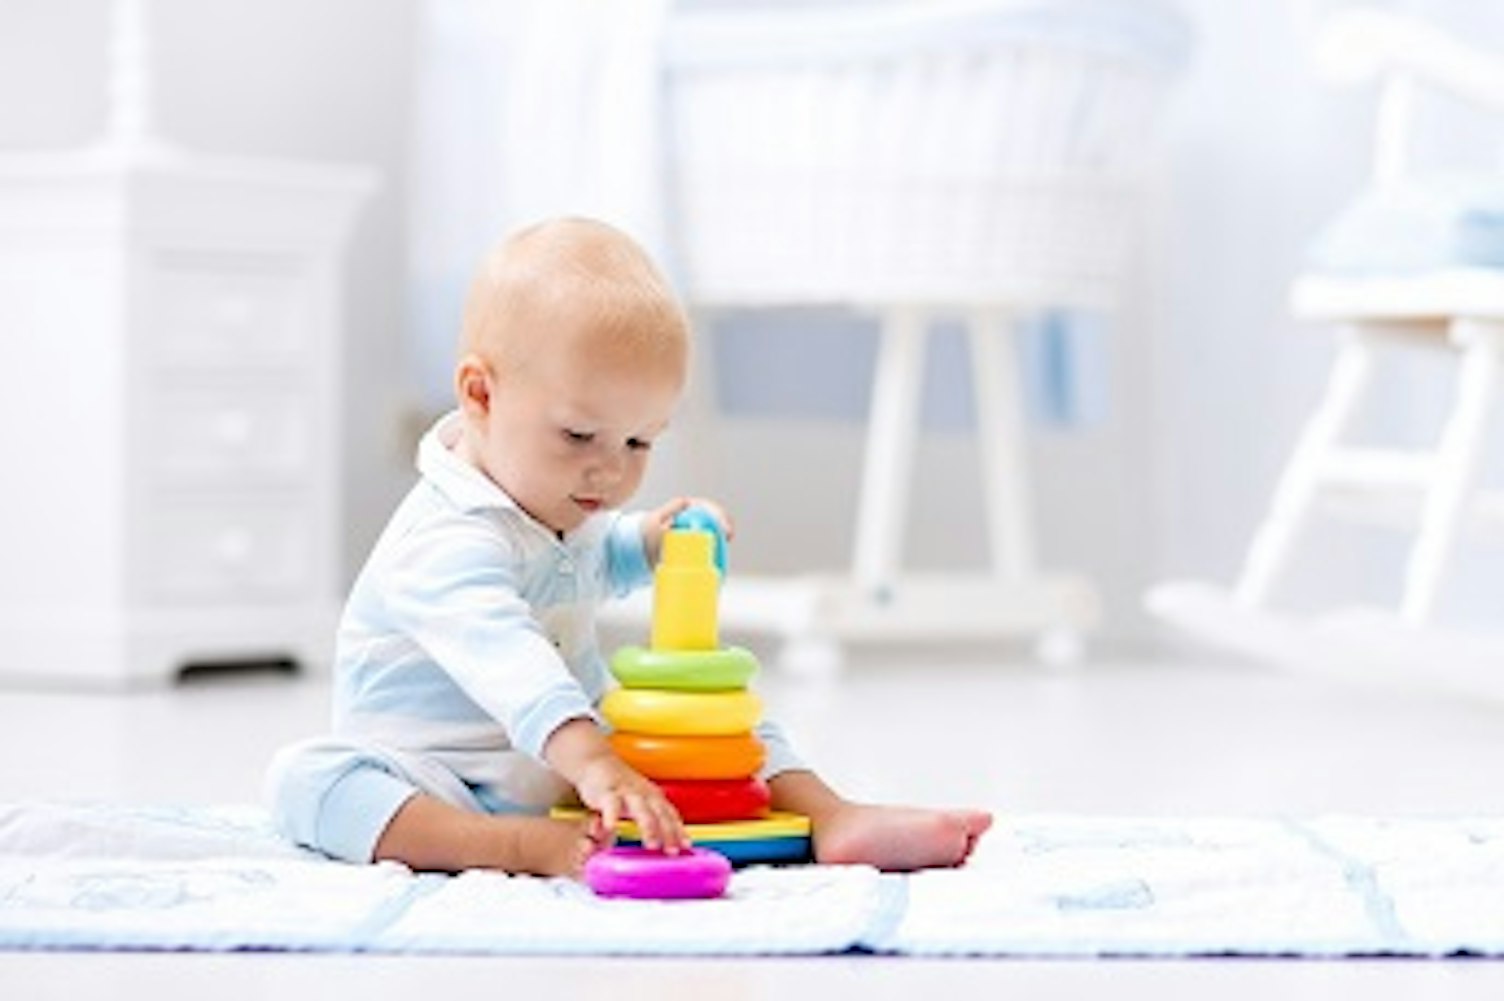 orig baby playing with colorful toy pyramid